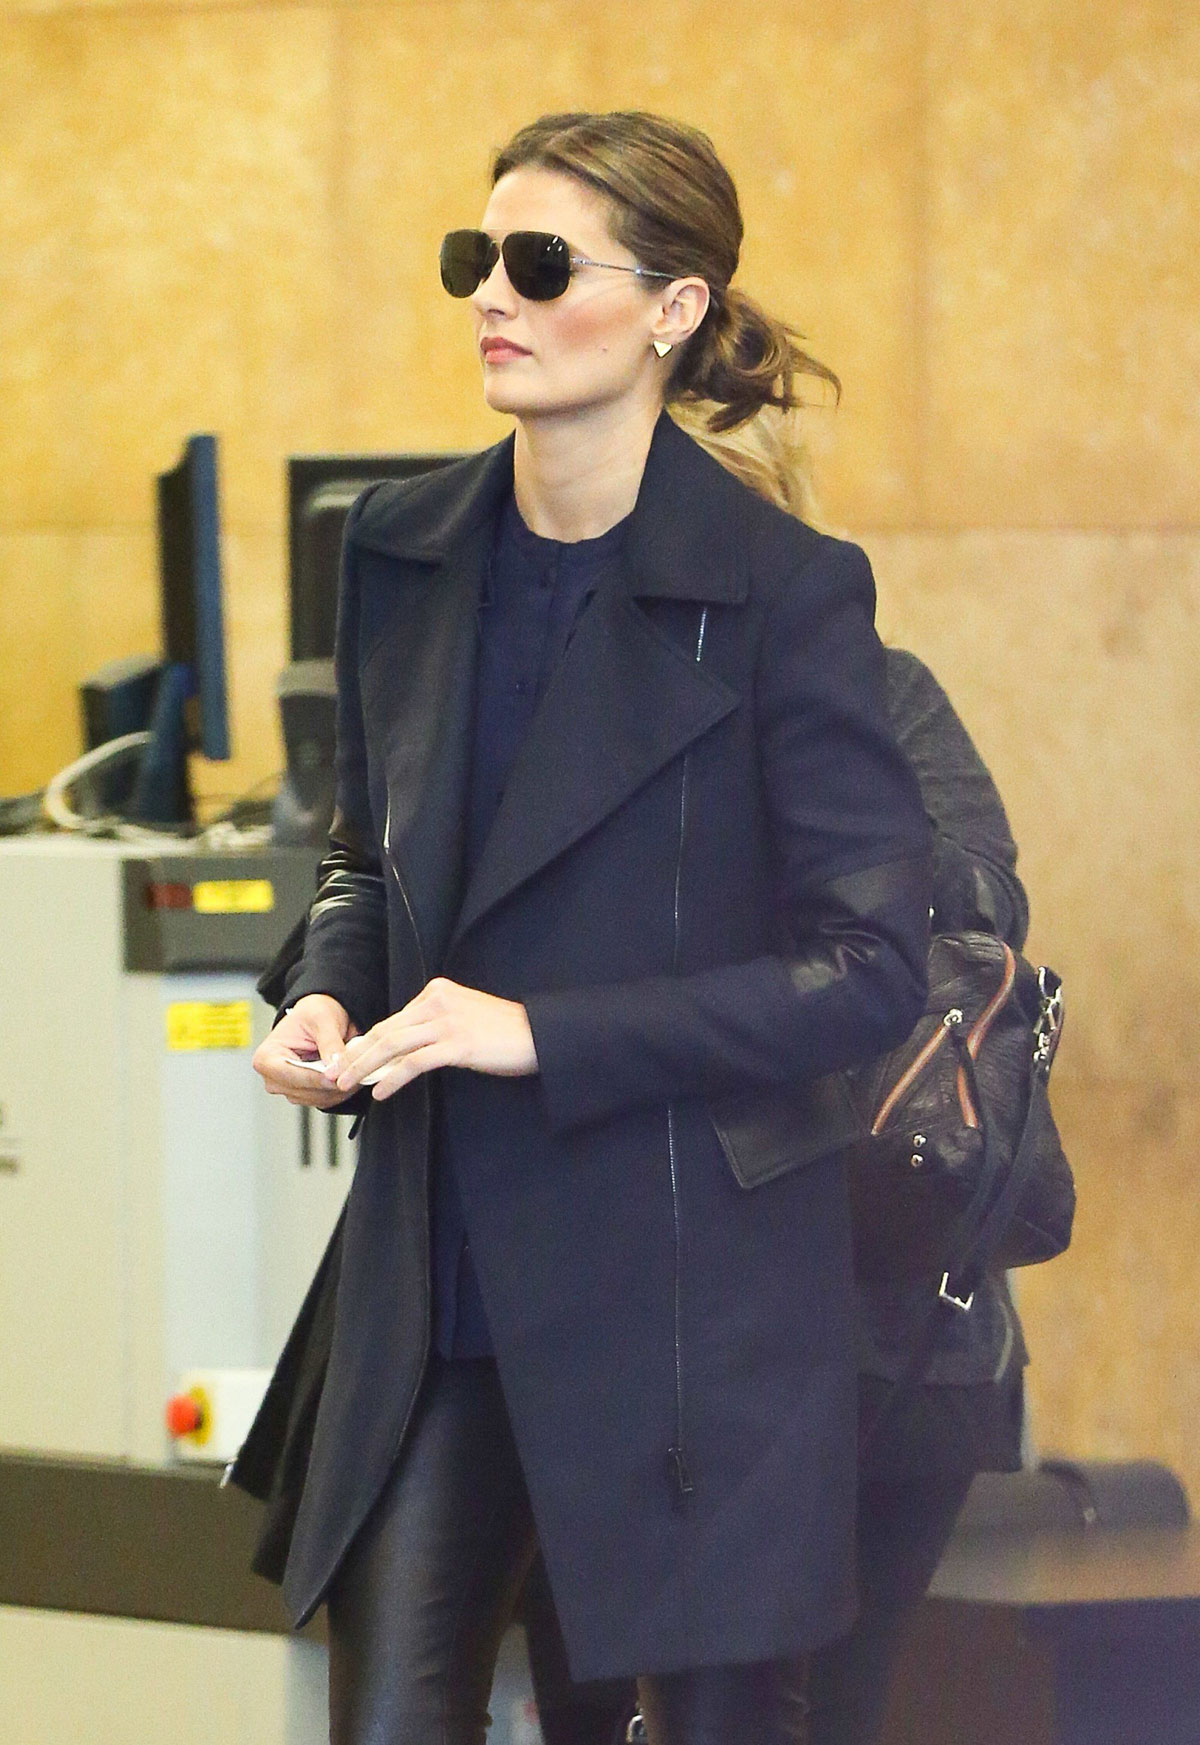 Stana Katic was spotted in New York